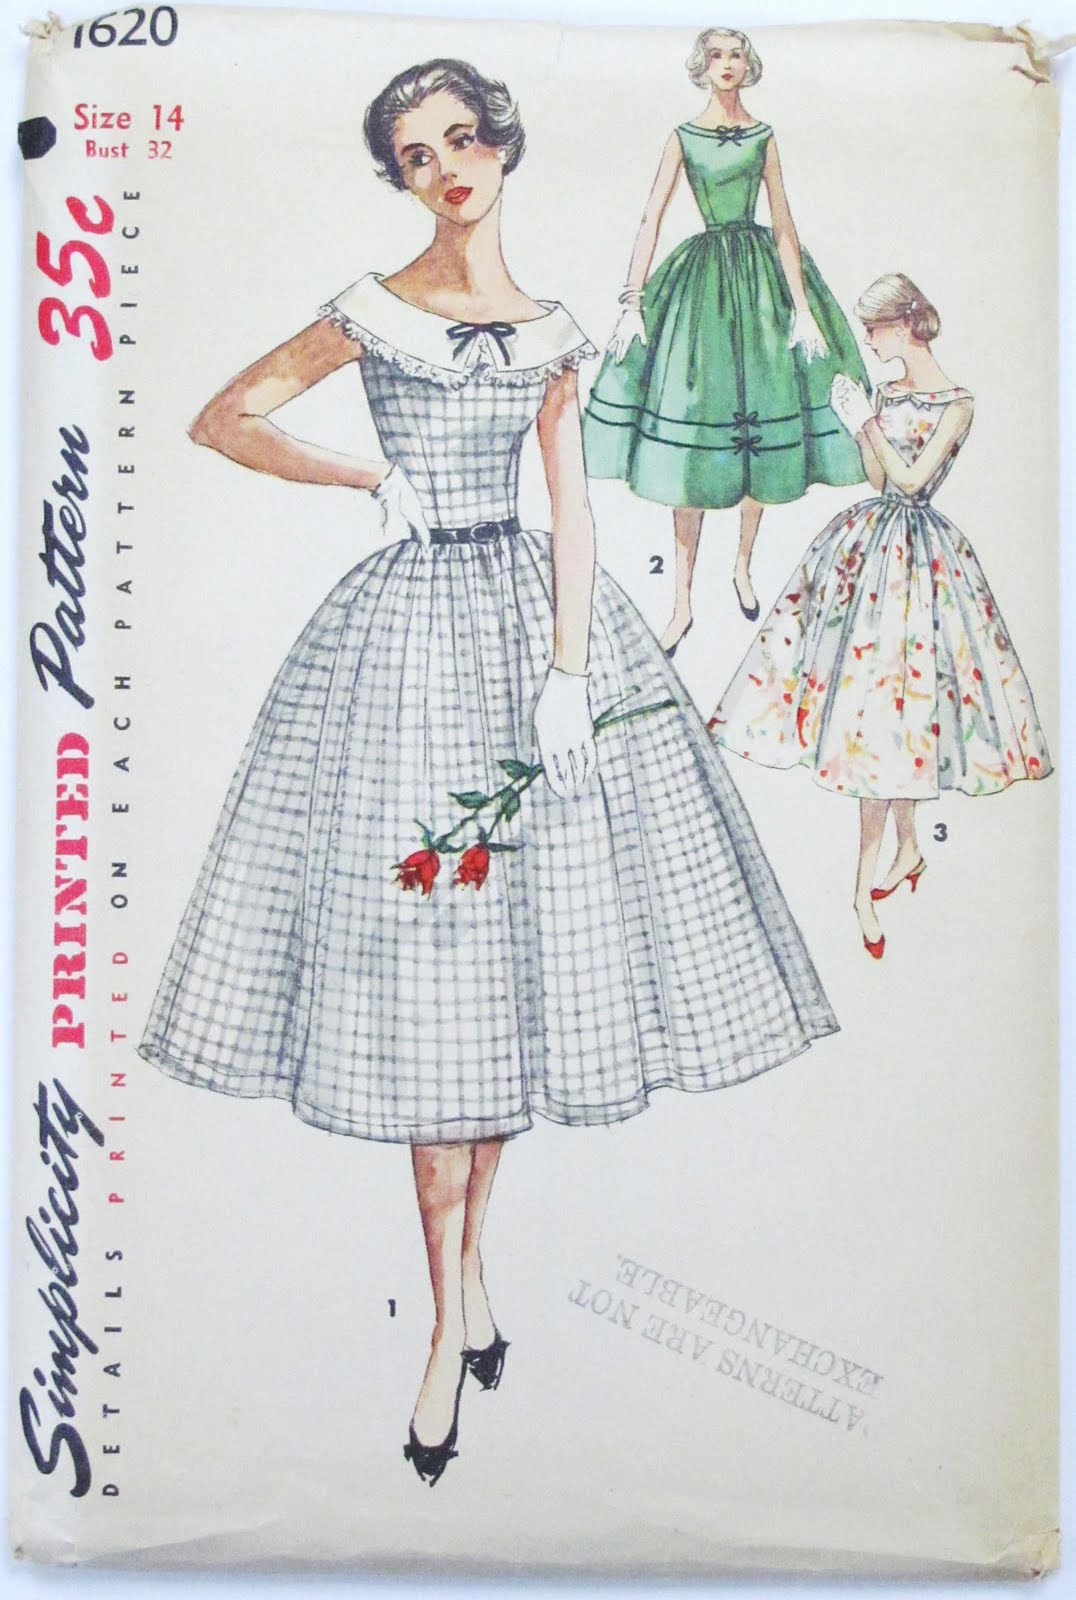 Simplicity Sewing Patterns For Sale | Discount Simplicity Sewing